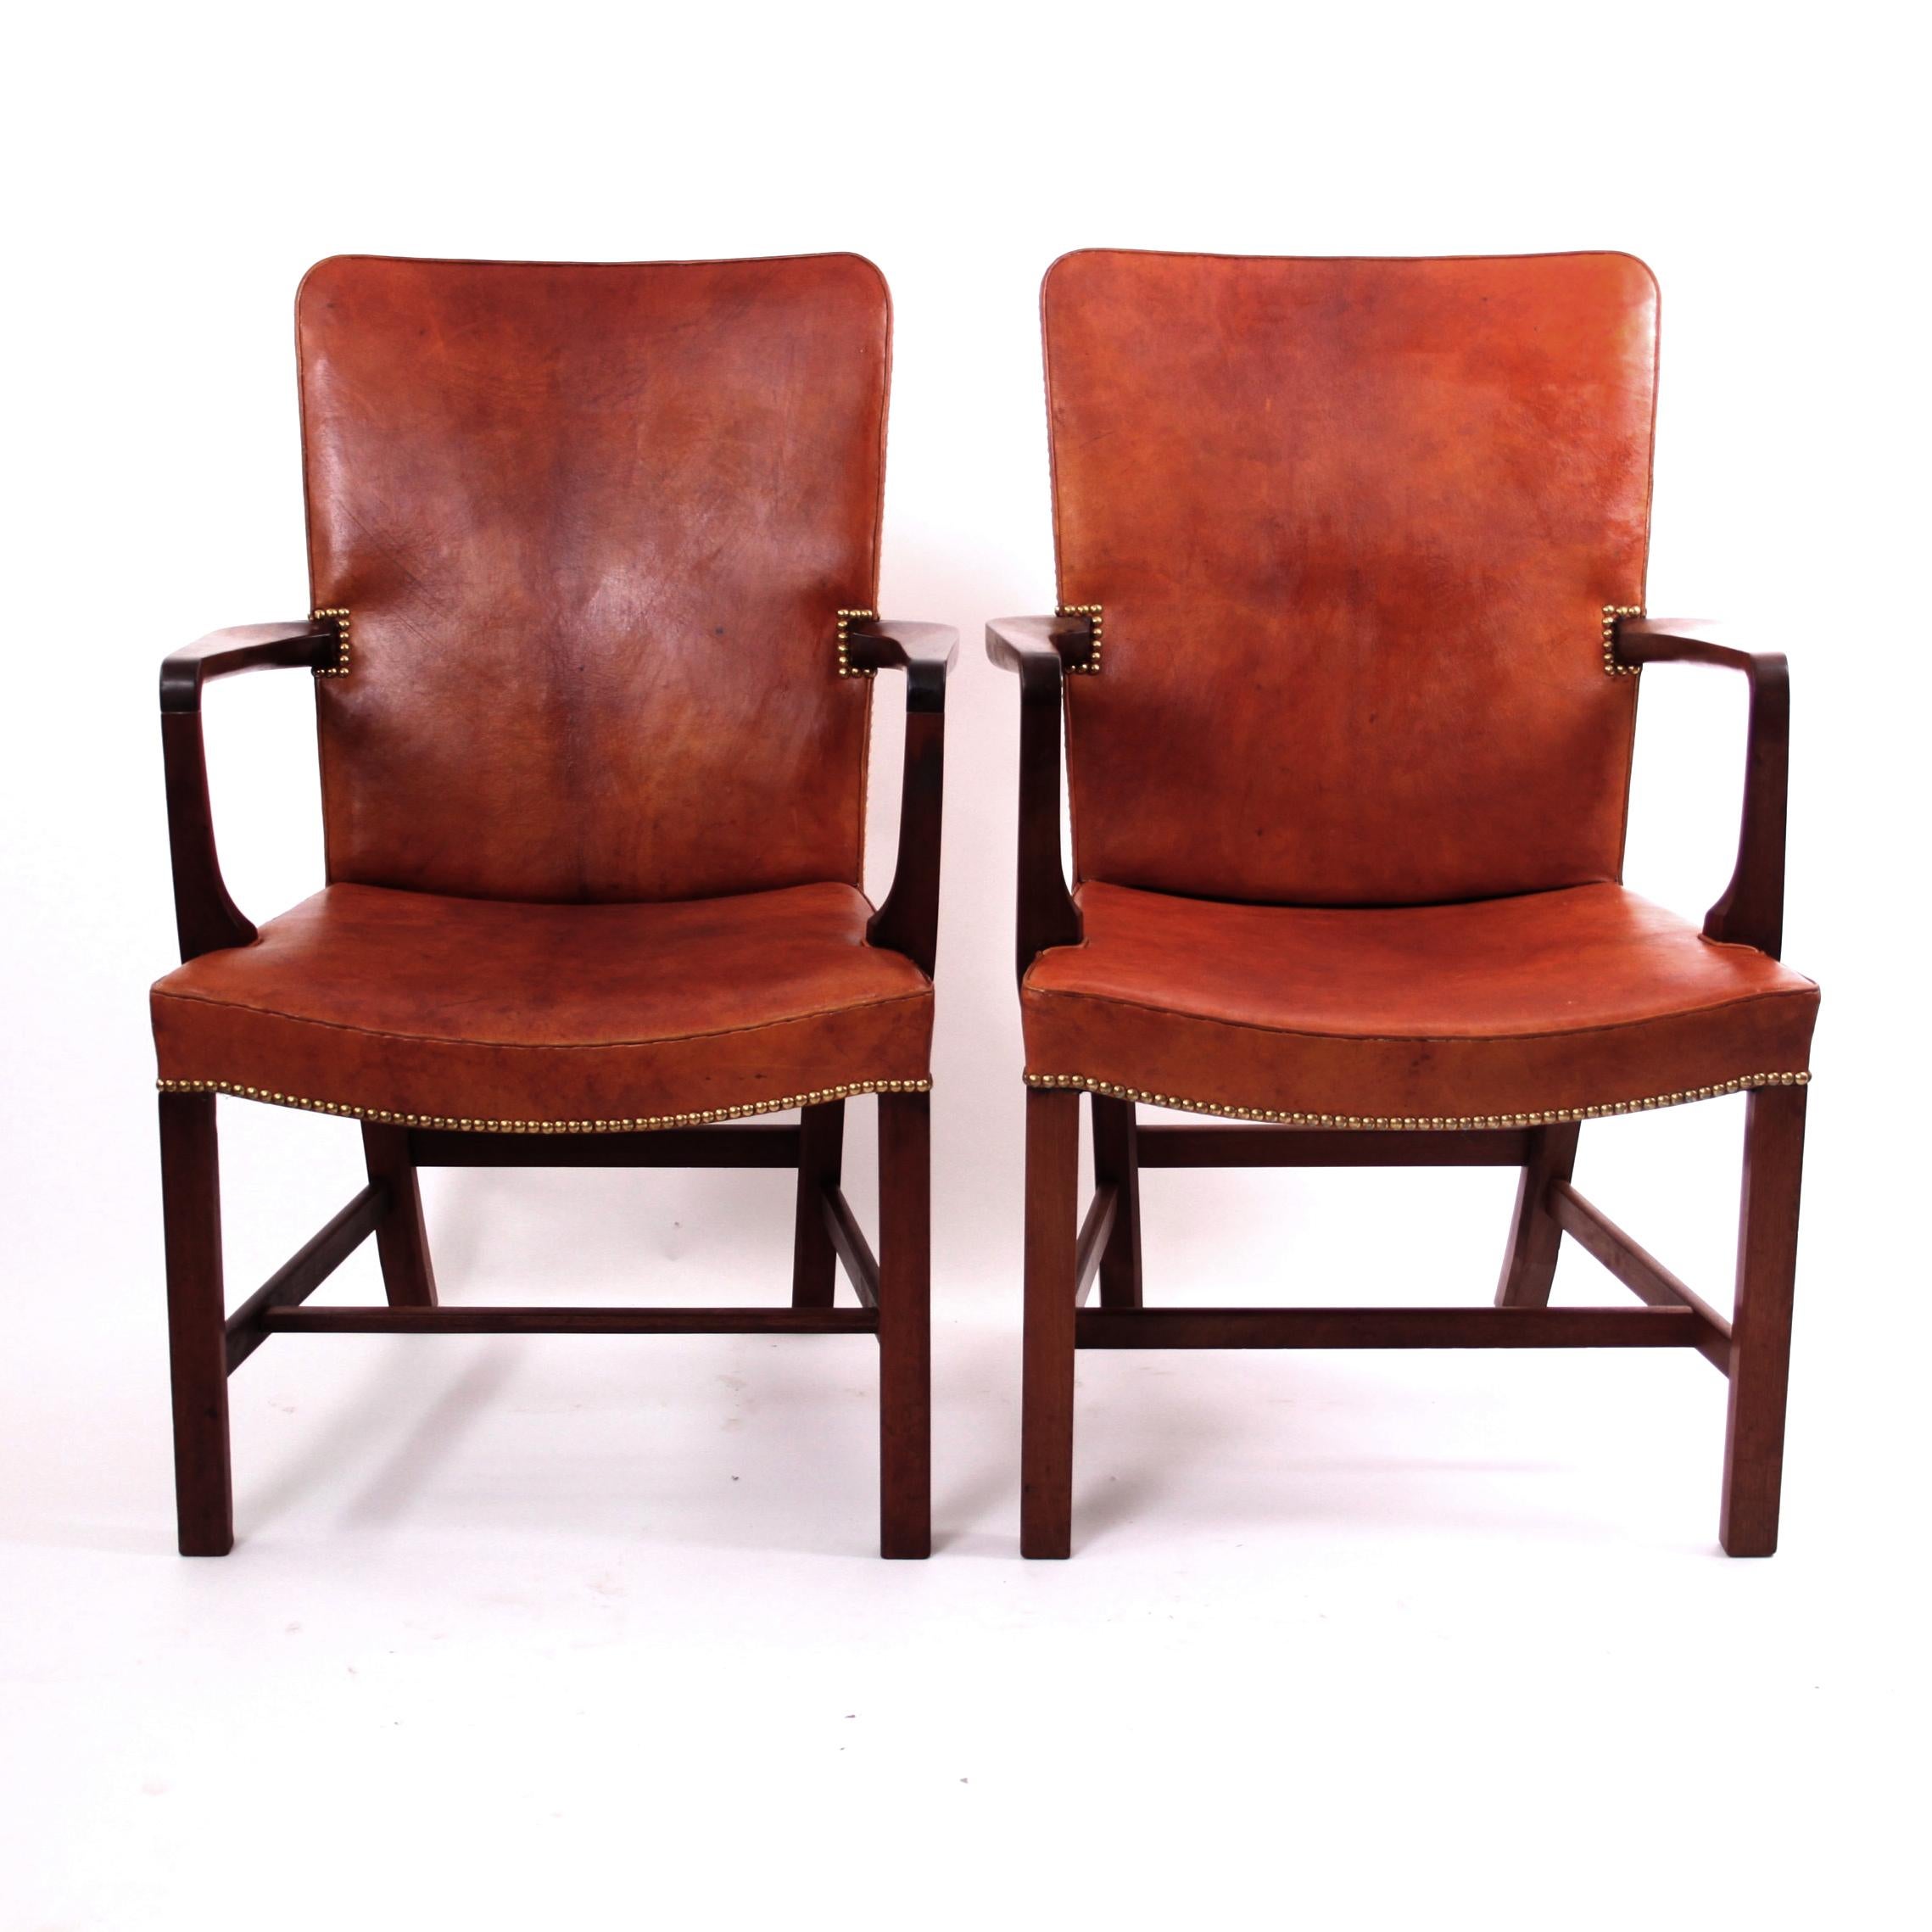 Kaare Klint & Rud Rasmussen, Mid-Century Modern Design

A magnificent pair of Kaare Klint 'Nørrevold' armchairs in patinated Nigerian leather, model no. 5999. This is the largest chair in the series of 